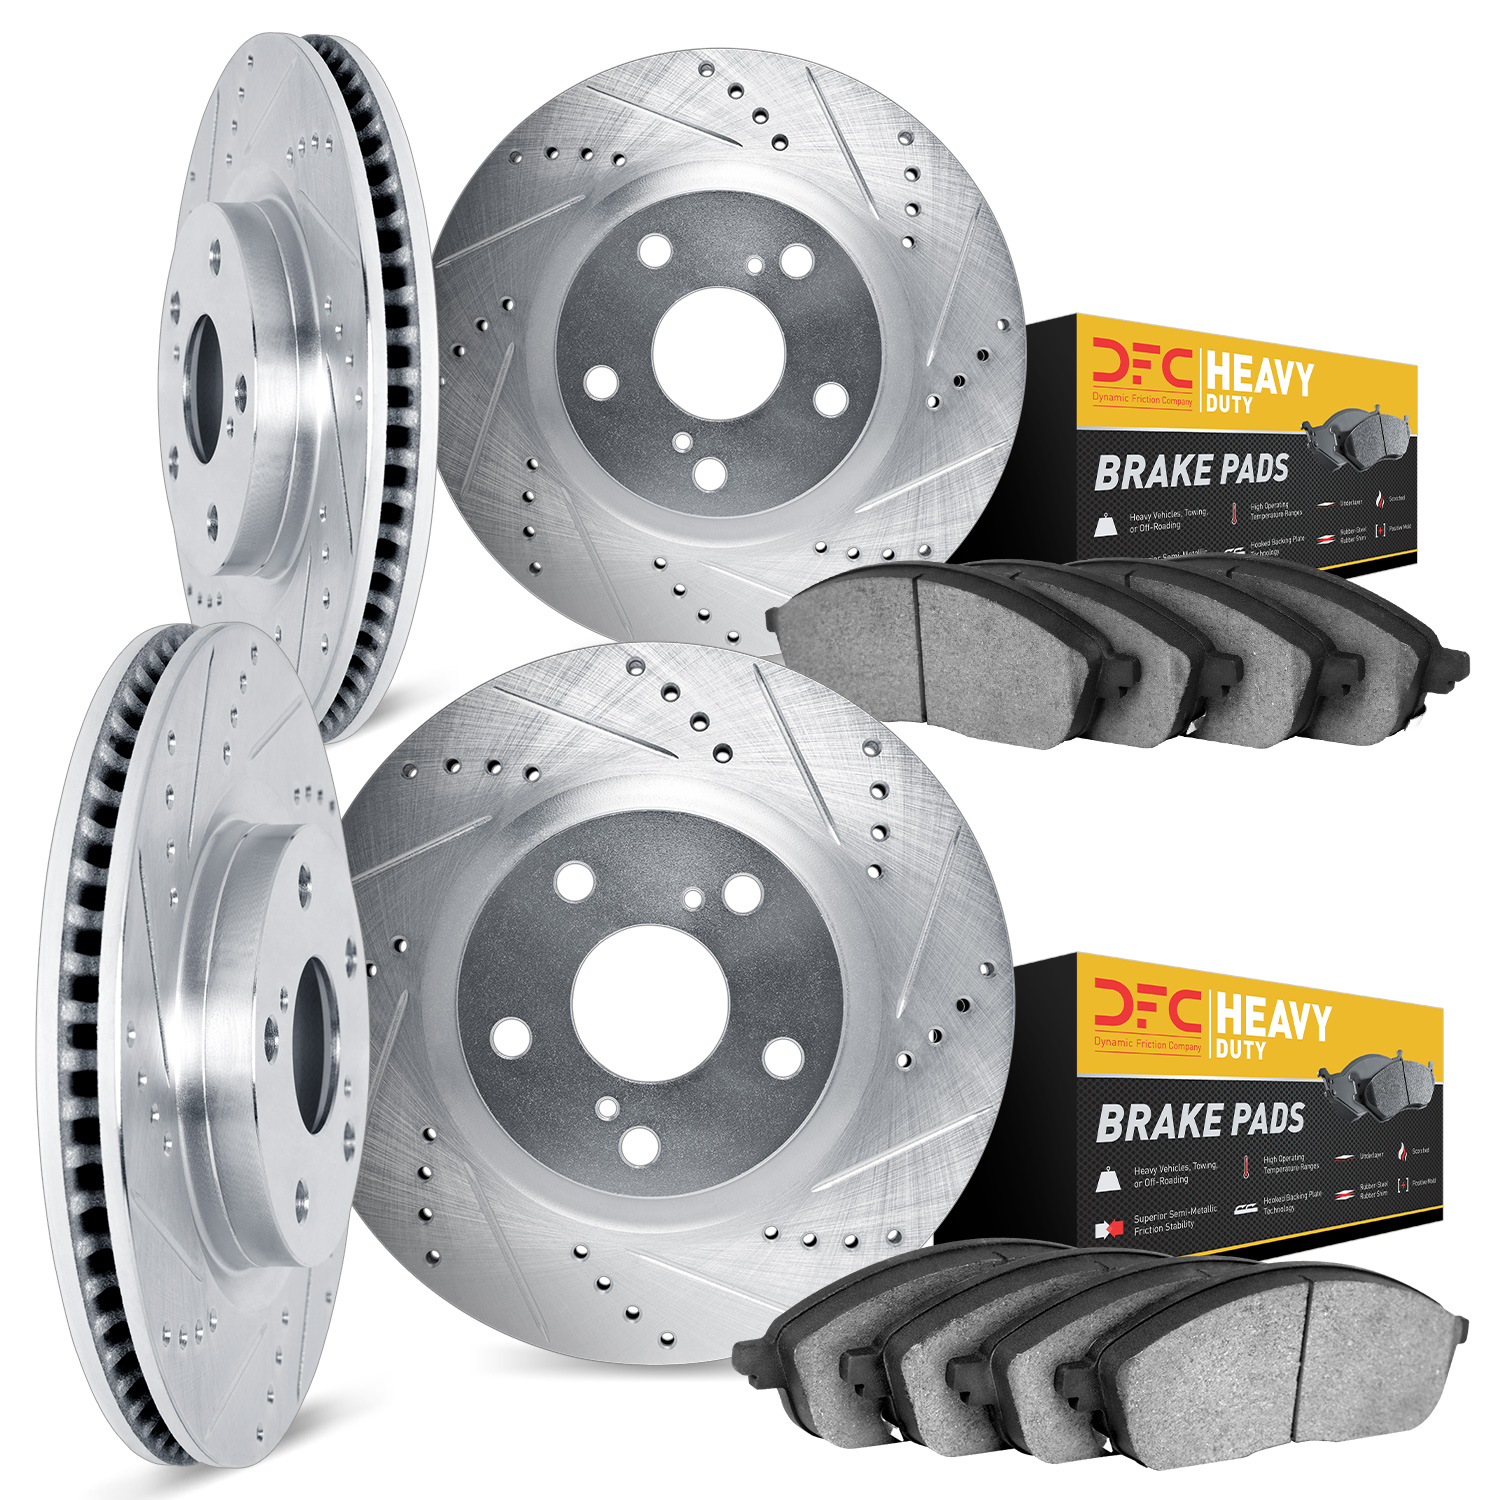 7204-39056 Drilled/Slotted Rotors w/Heavy-Duty Brake Pads Kit [Silver], 2006-2014 Mopar, Position: Front and Rear